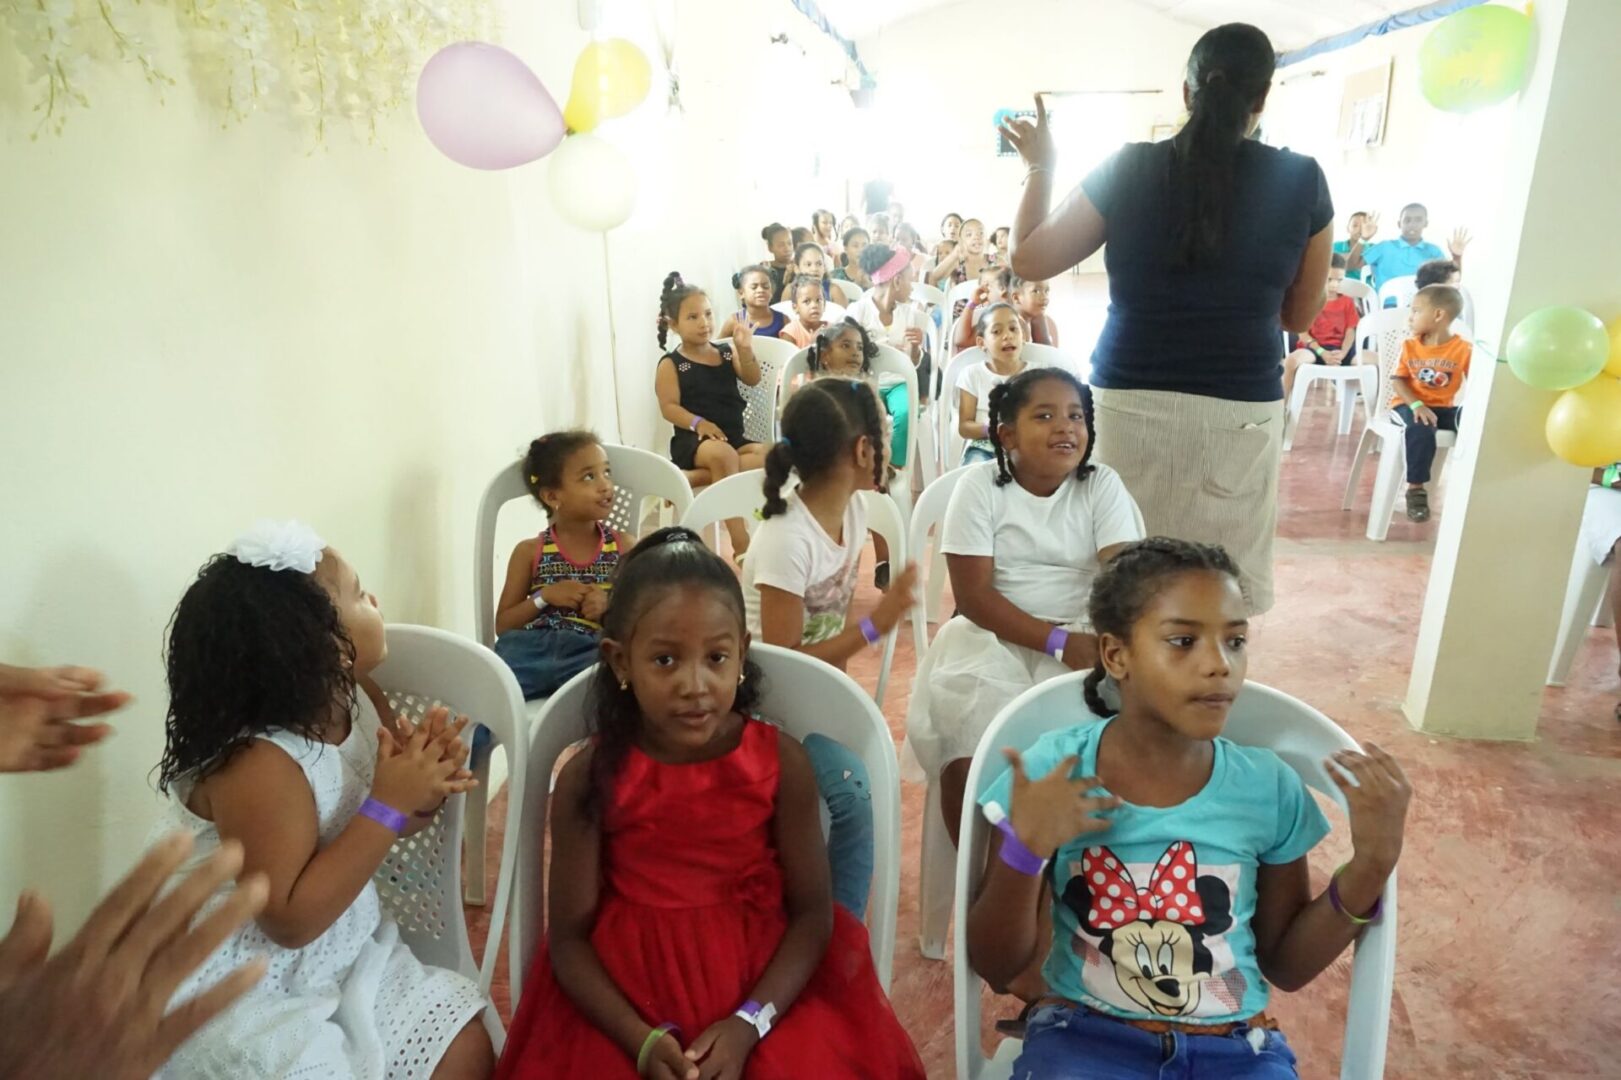 Girls sitting in white chairs clapping and singing